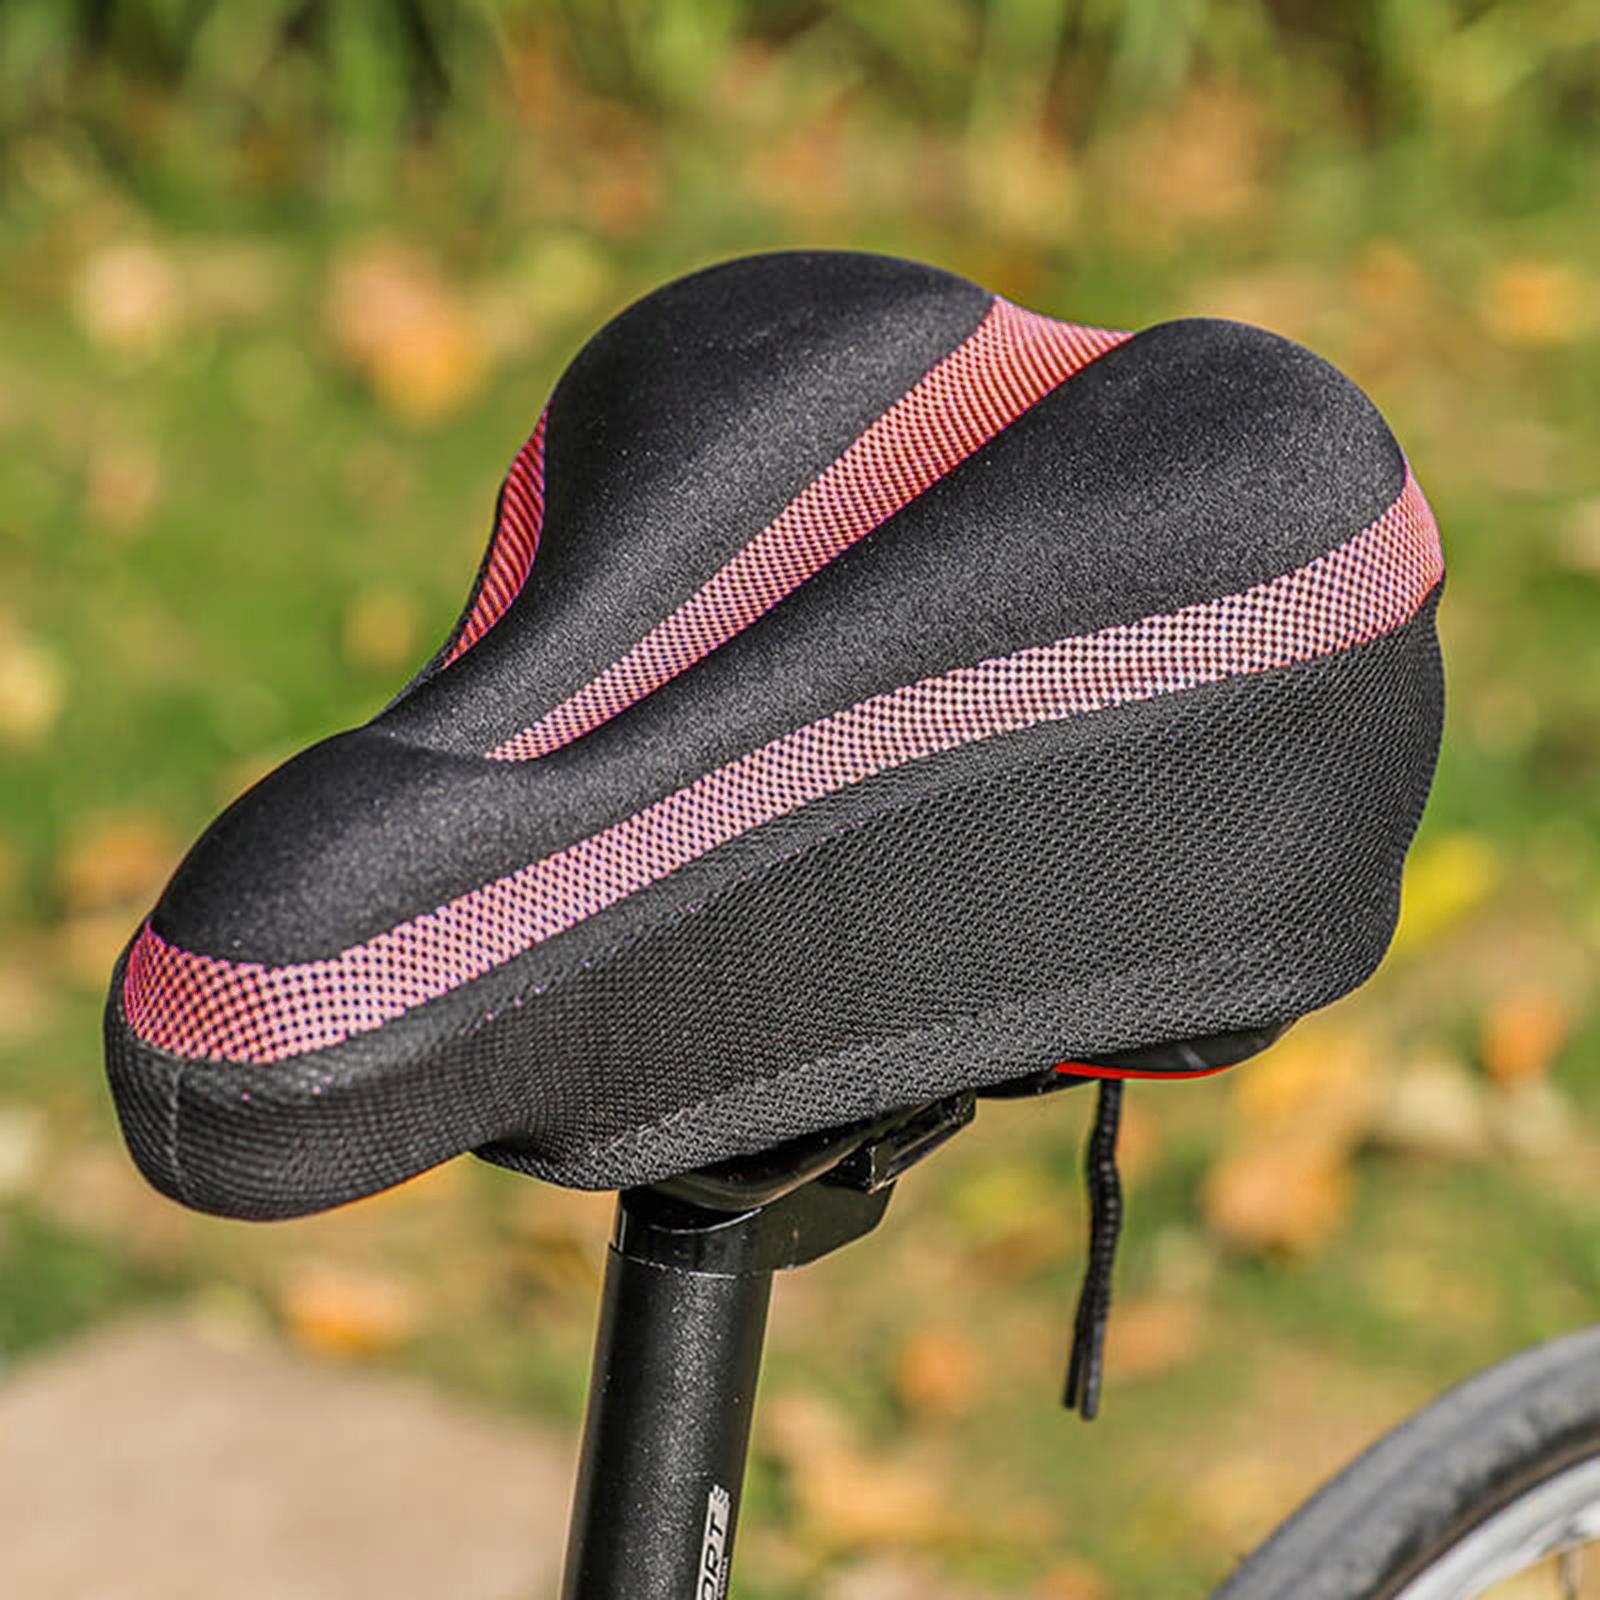 Bike Seat Cover Comfort Padding Soft Silicone Saddle Cushion Accessories Black and Red